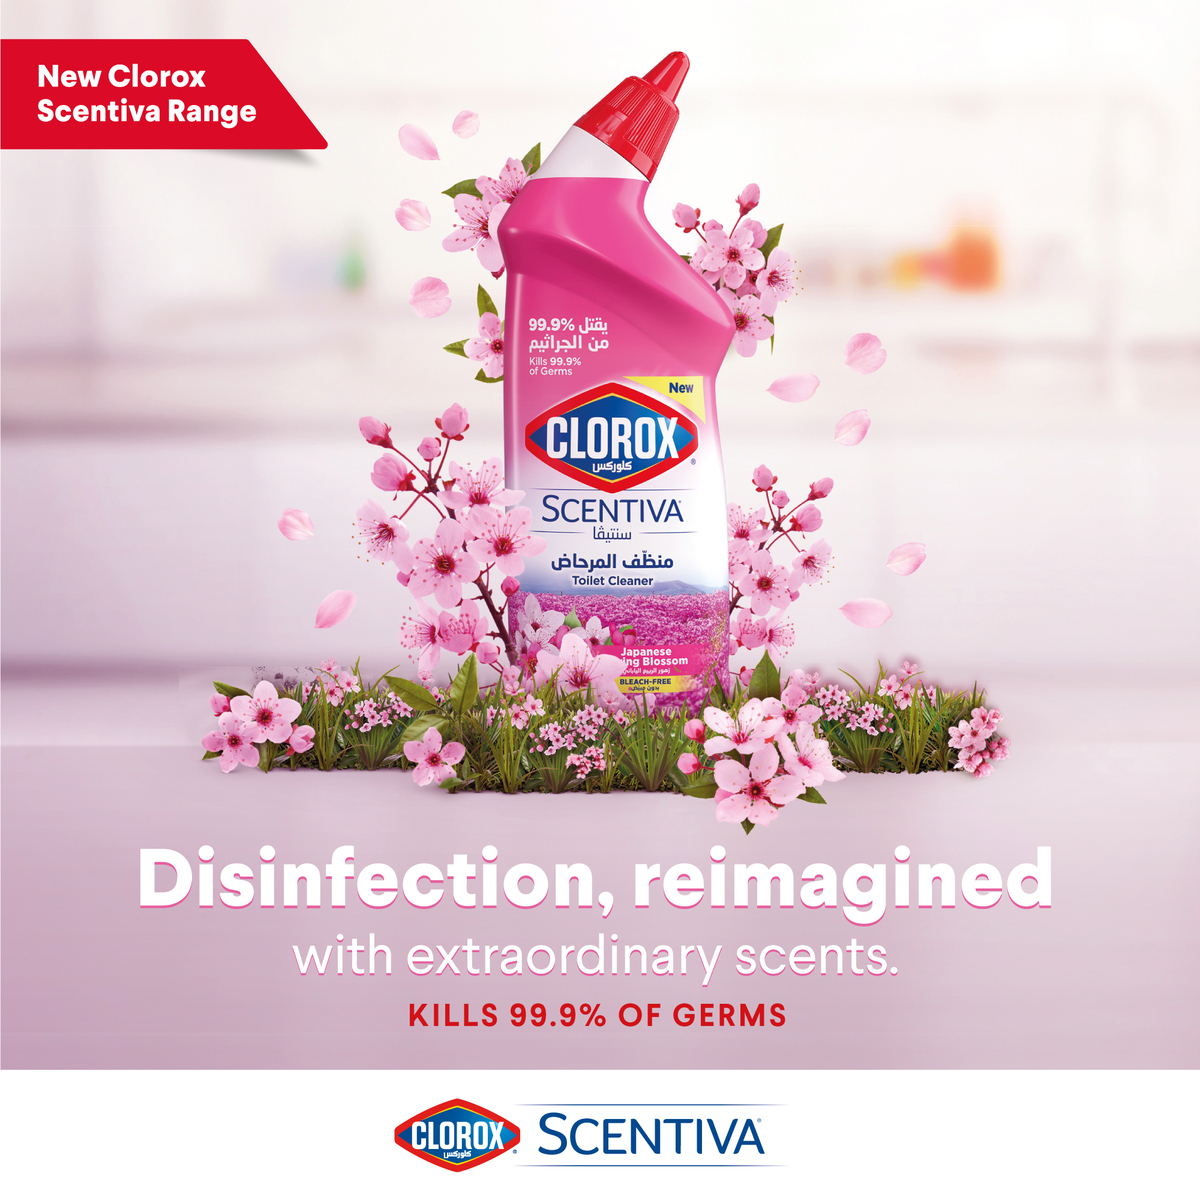 Clorox Scentiva Japanese Spring Blossom Toilet Cleaner 709 ml